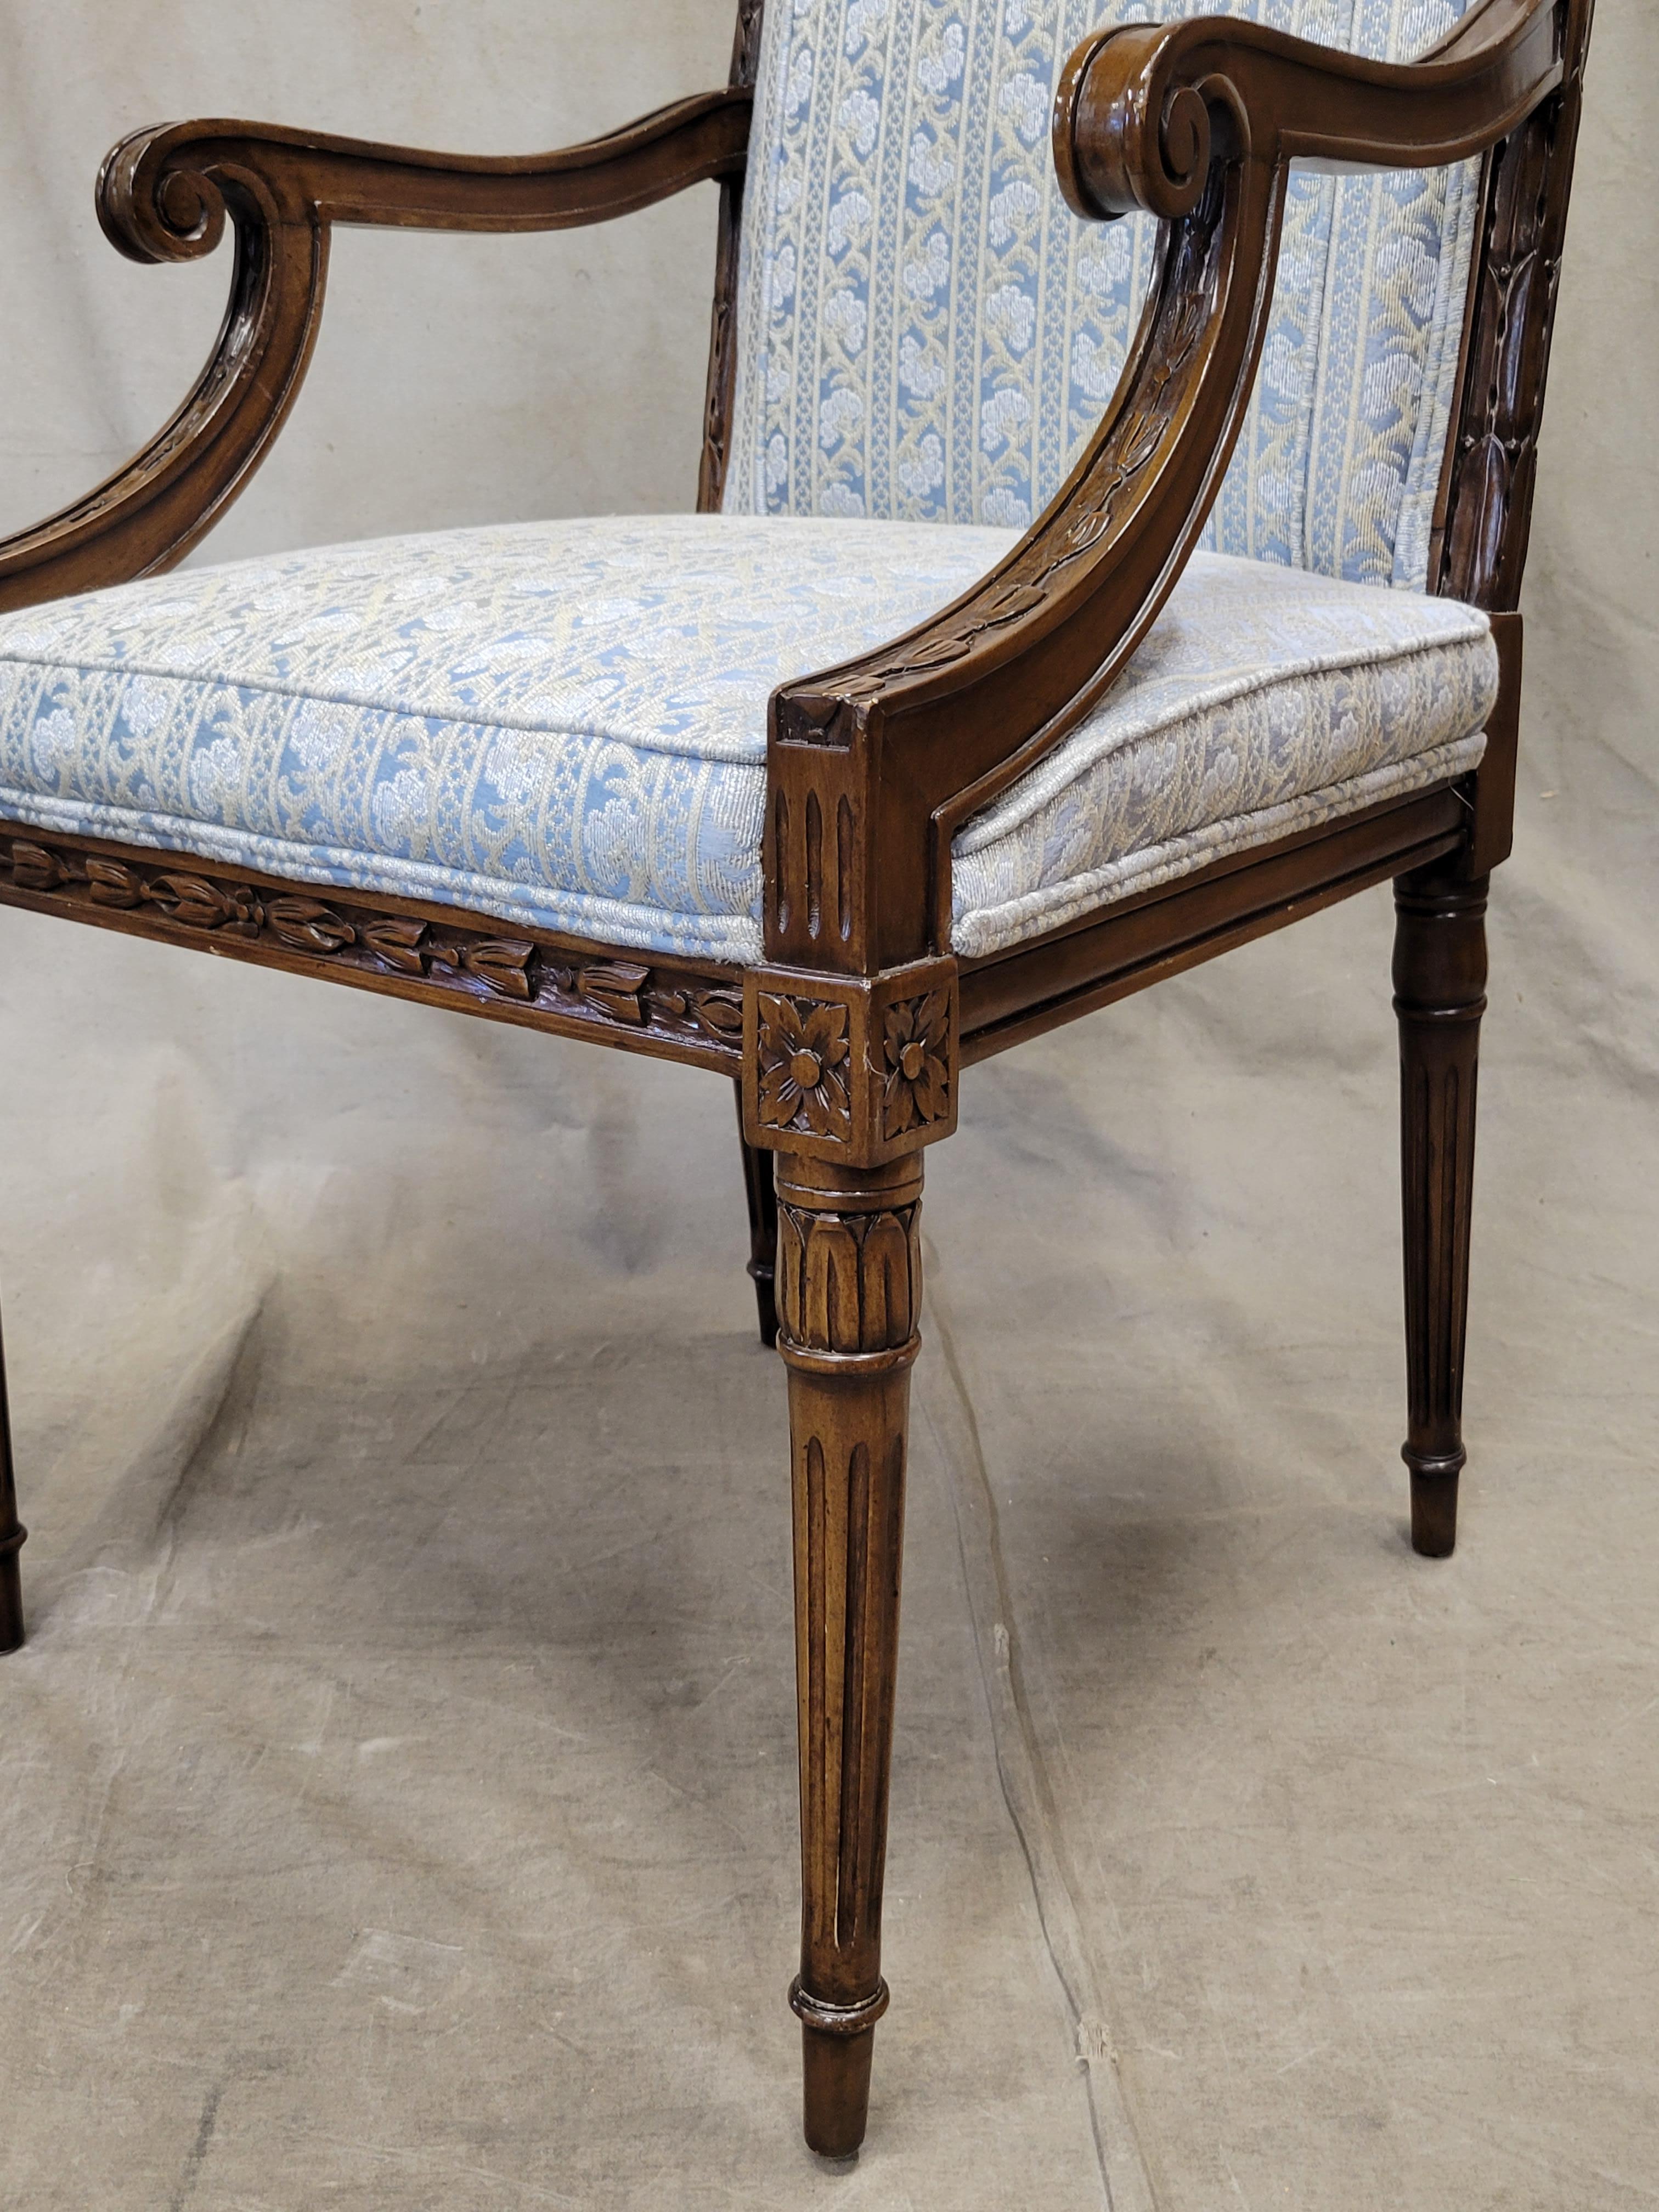 Hand-Carved Vintage Karges Neoclassical Dining Chairs With Pale Blue Upholstery - Set of 8